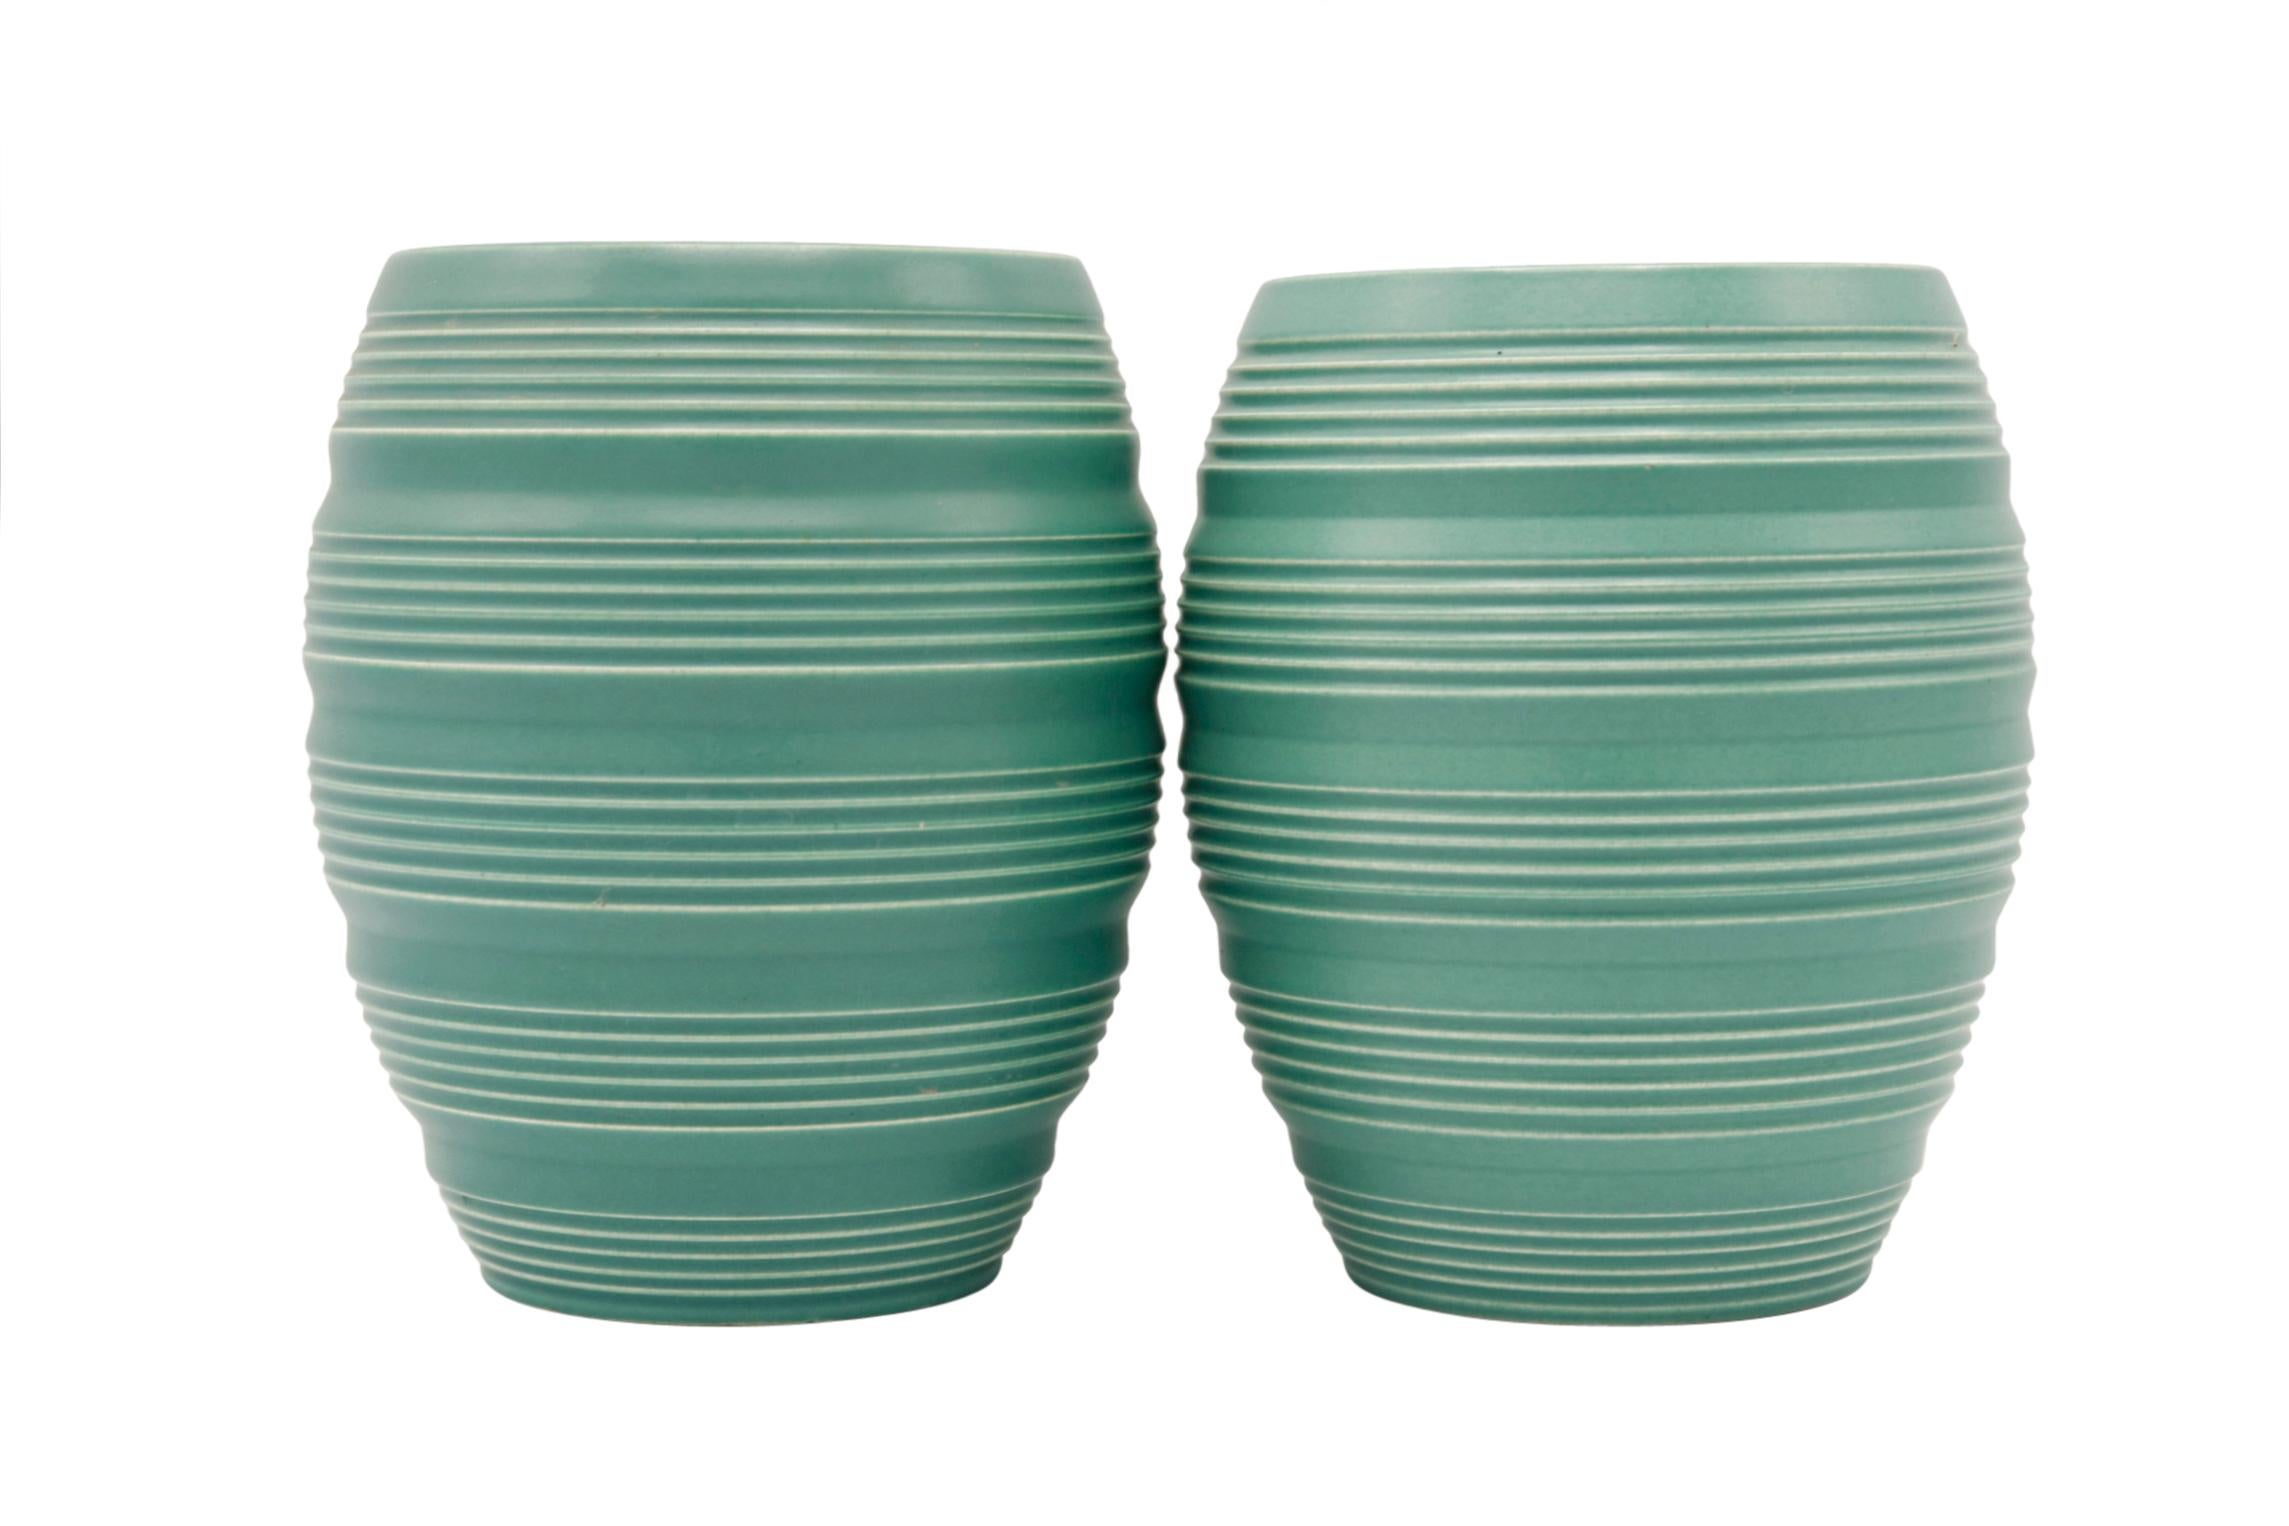 Unique shape and Keith Murray's traditional green glaze. Pair of deco inspired ribbed vases.